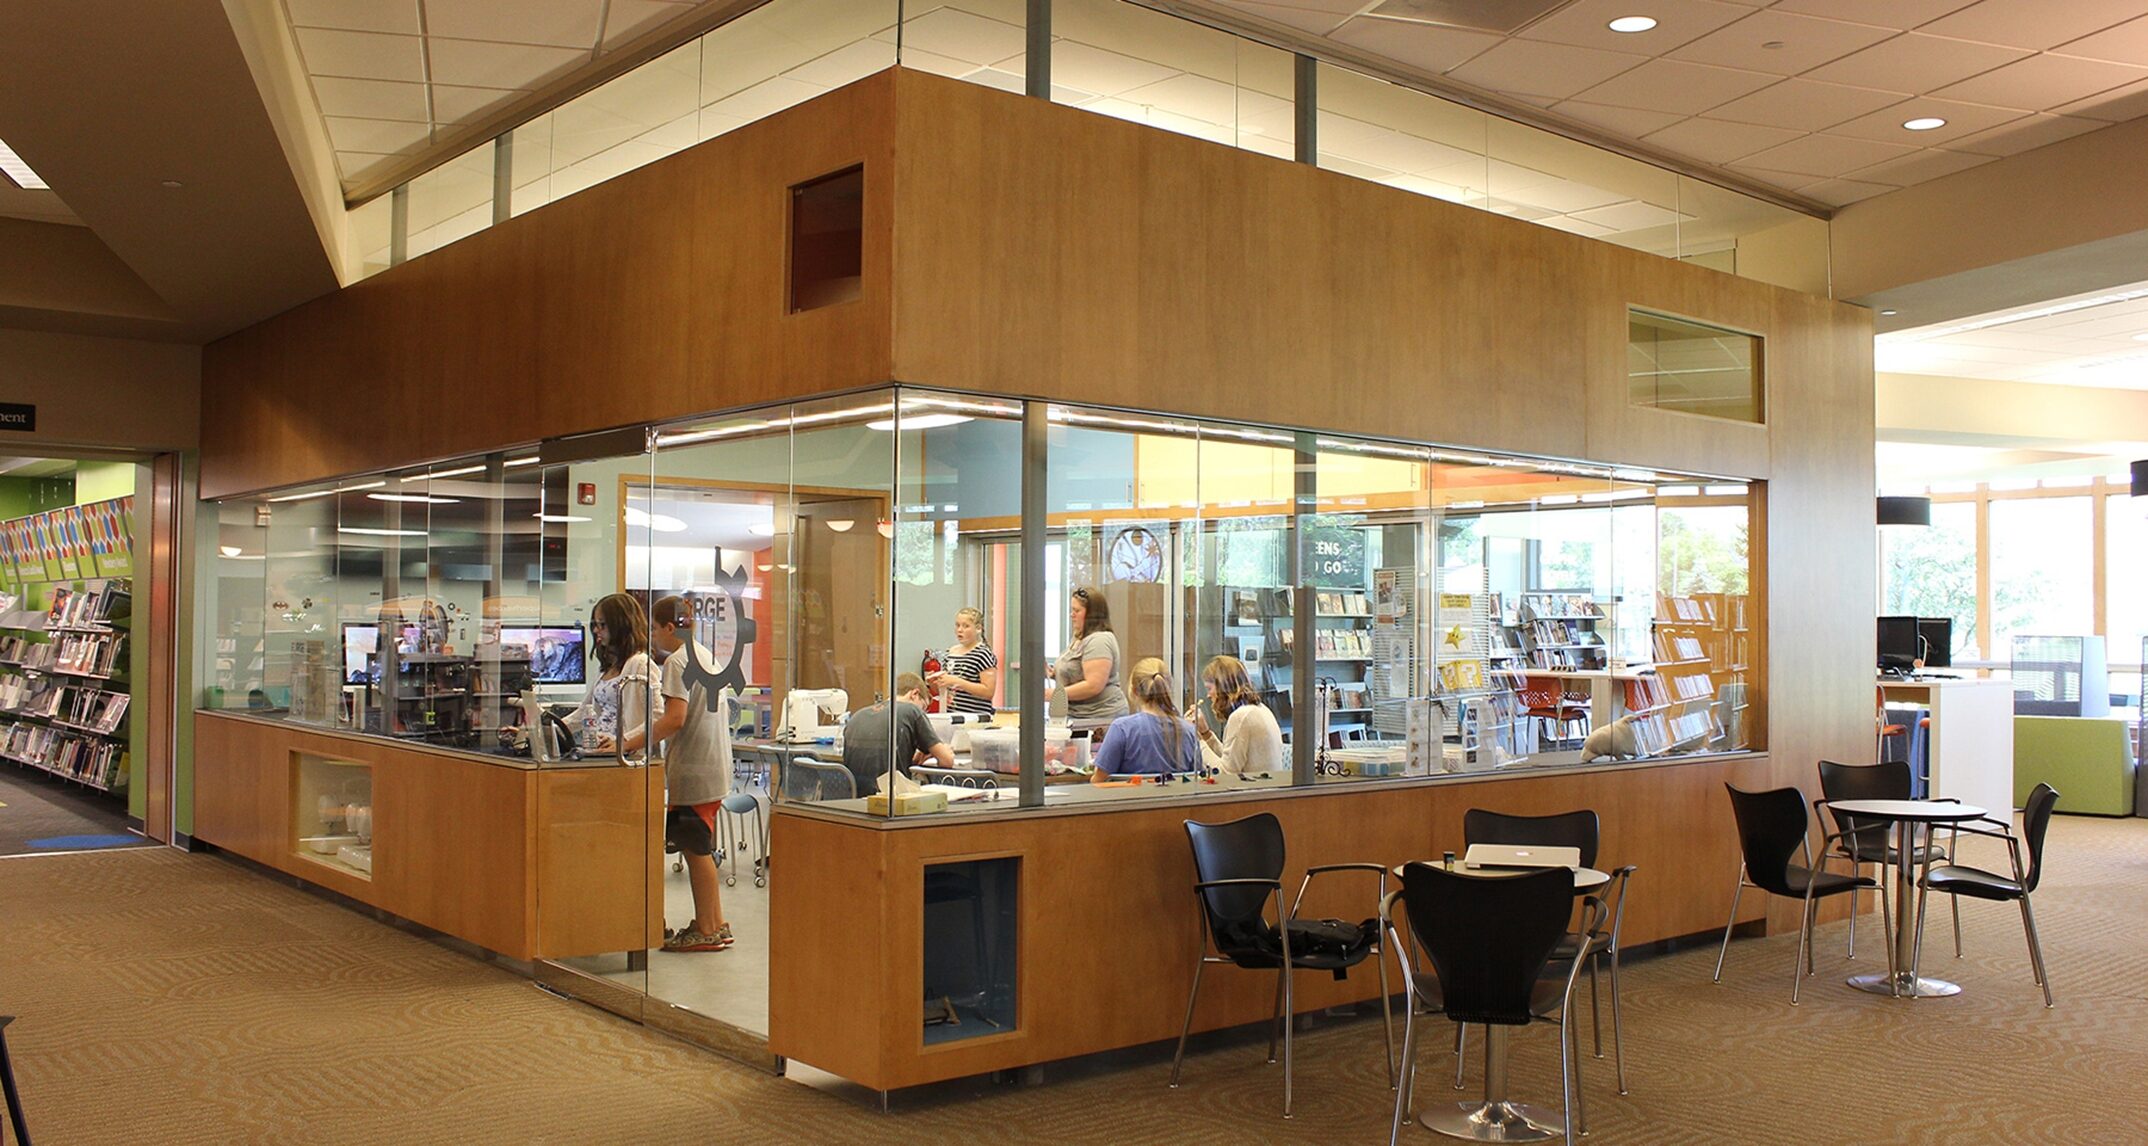 The Forge is an open makerspace within the Ela Public Library that features large expanses of glass to showcase learning and put project work on display. Image courtesy of Demco Interiors